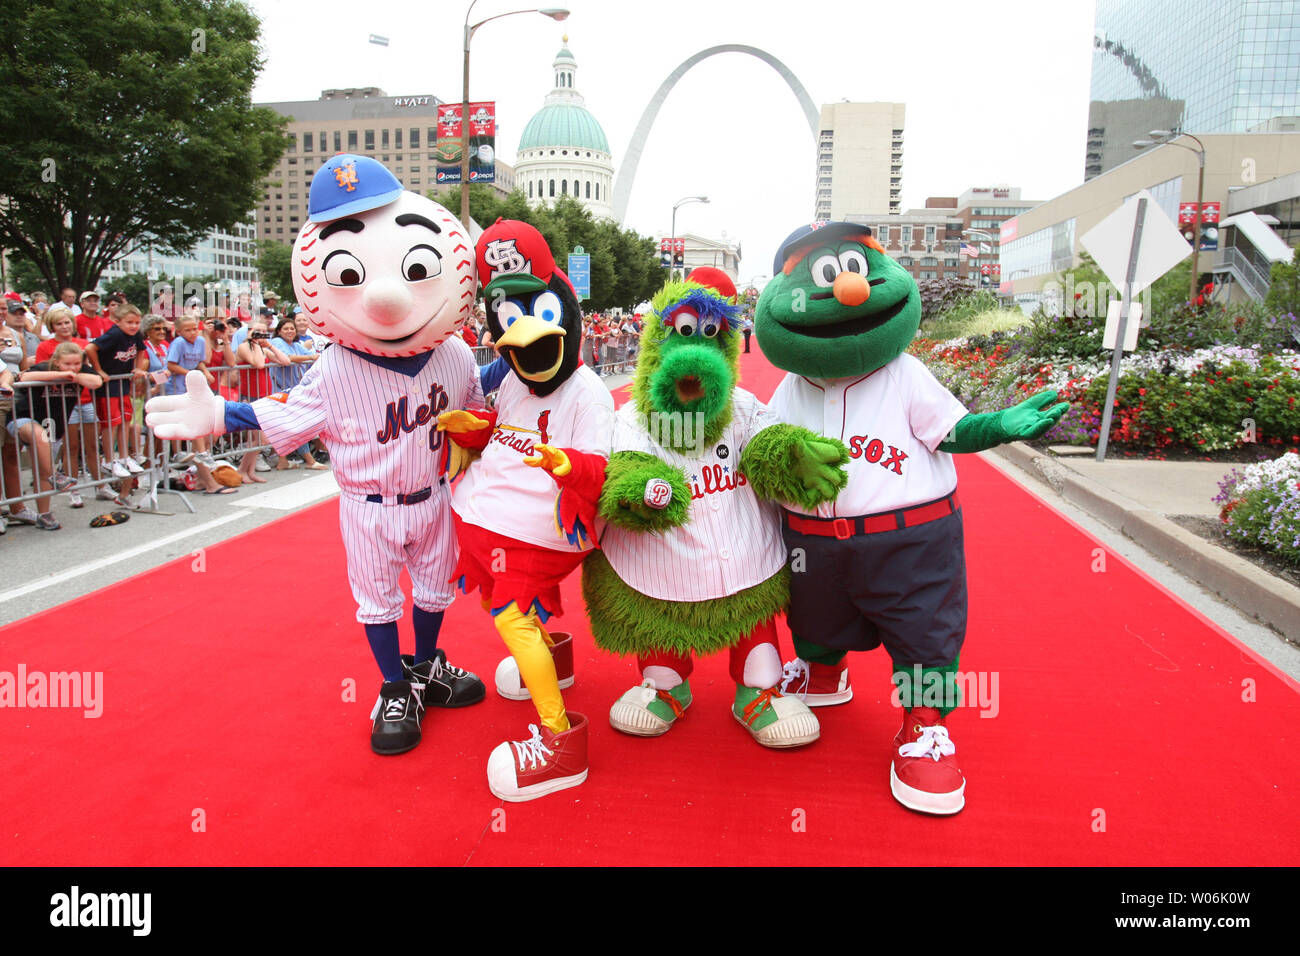 Baseball mascots from New York, St. Louis, Philadelphia and Boston ham it up just before the Red Carpet parade of players through downtown St. Louis during the MLB All Star Game festivities on July 14, 2009. (UPI Photo/Bill Greenblatt) Stock Photo